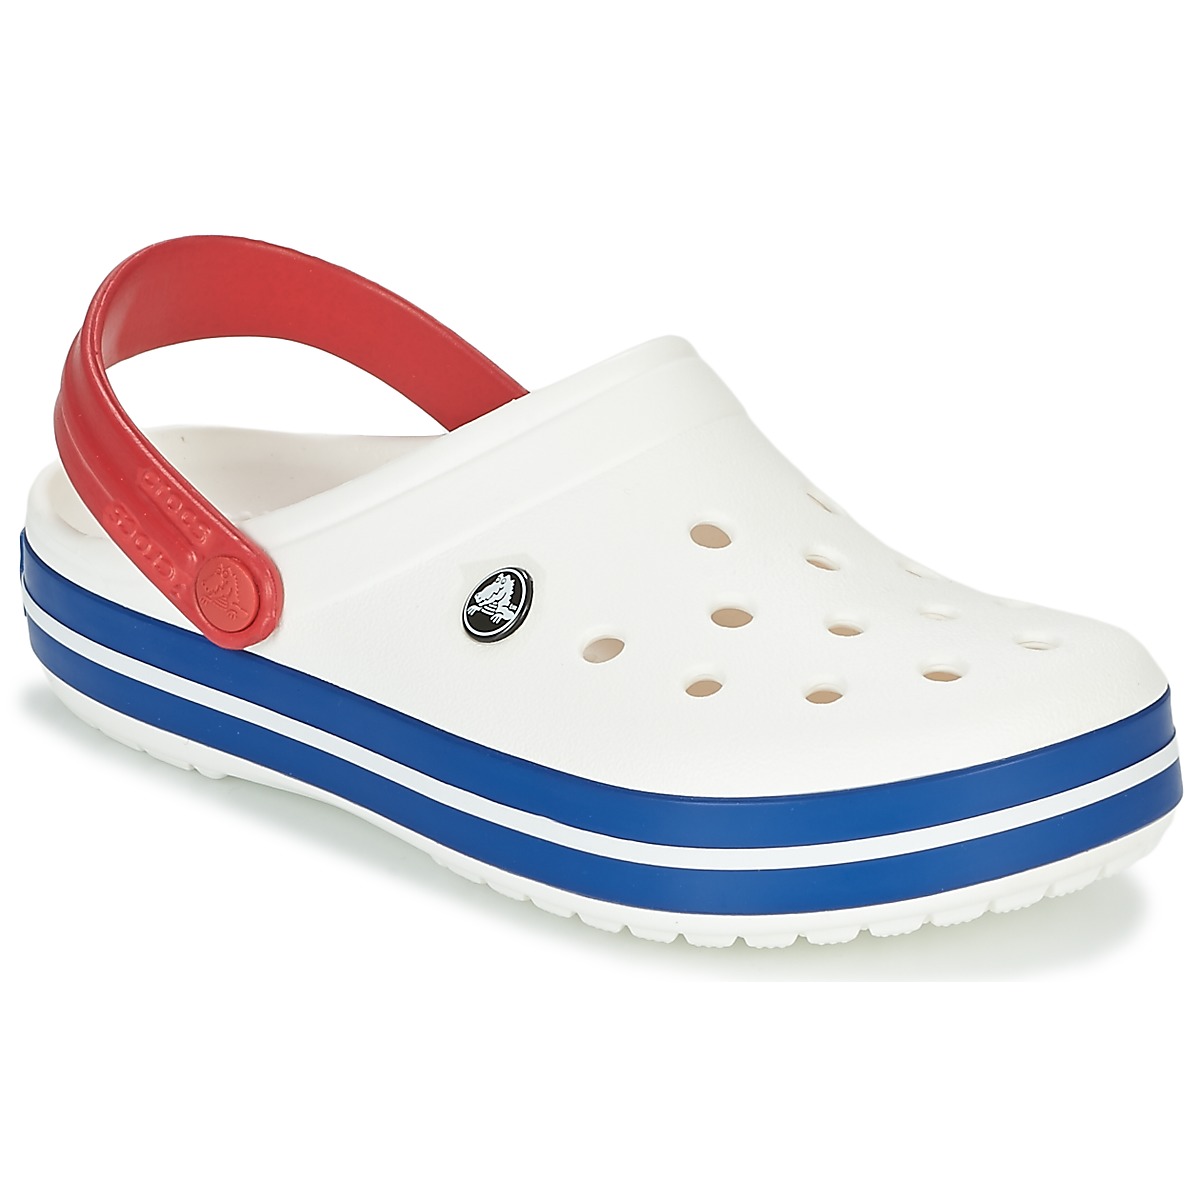 Clogs | Crocs - Spartoo Shoes NET Free - / ! CROCBAND / Blue delivery Red White